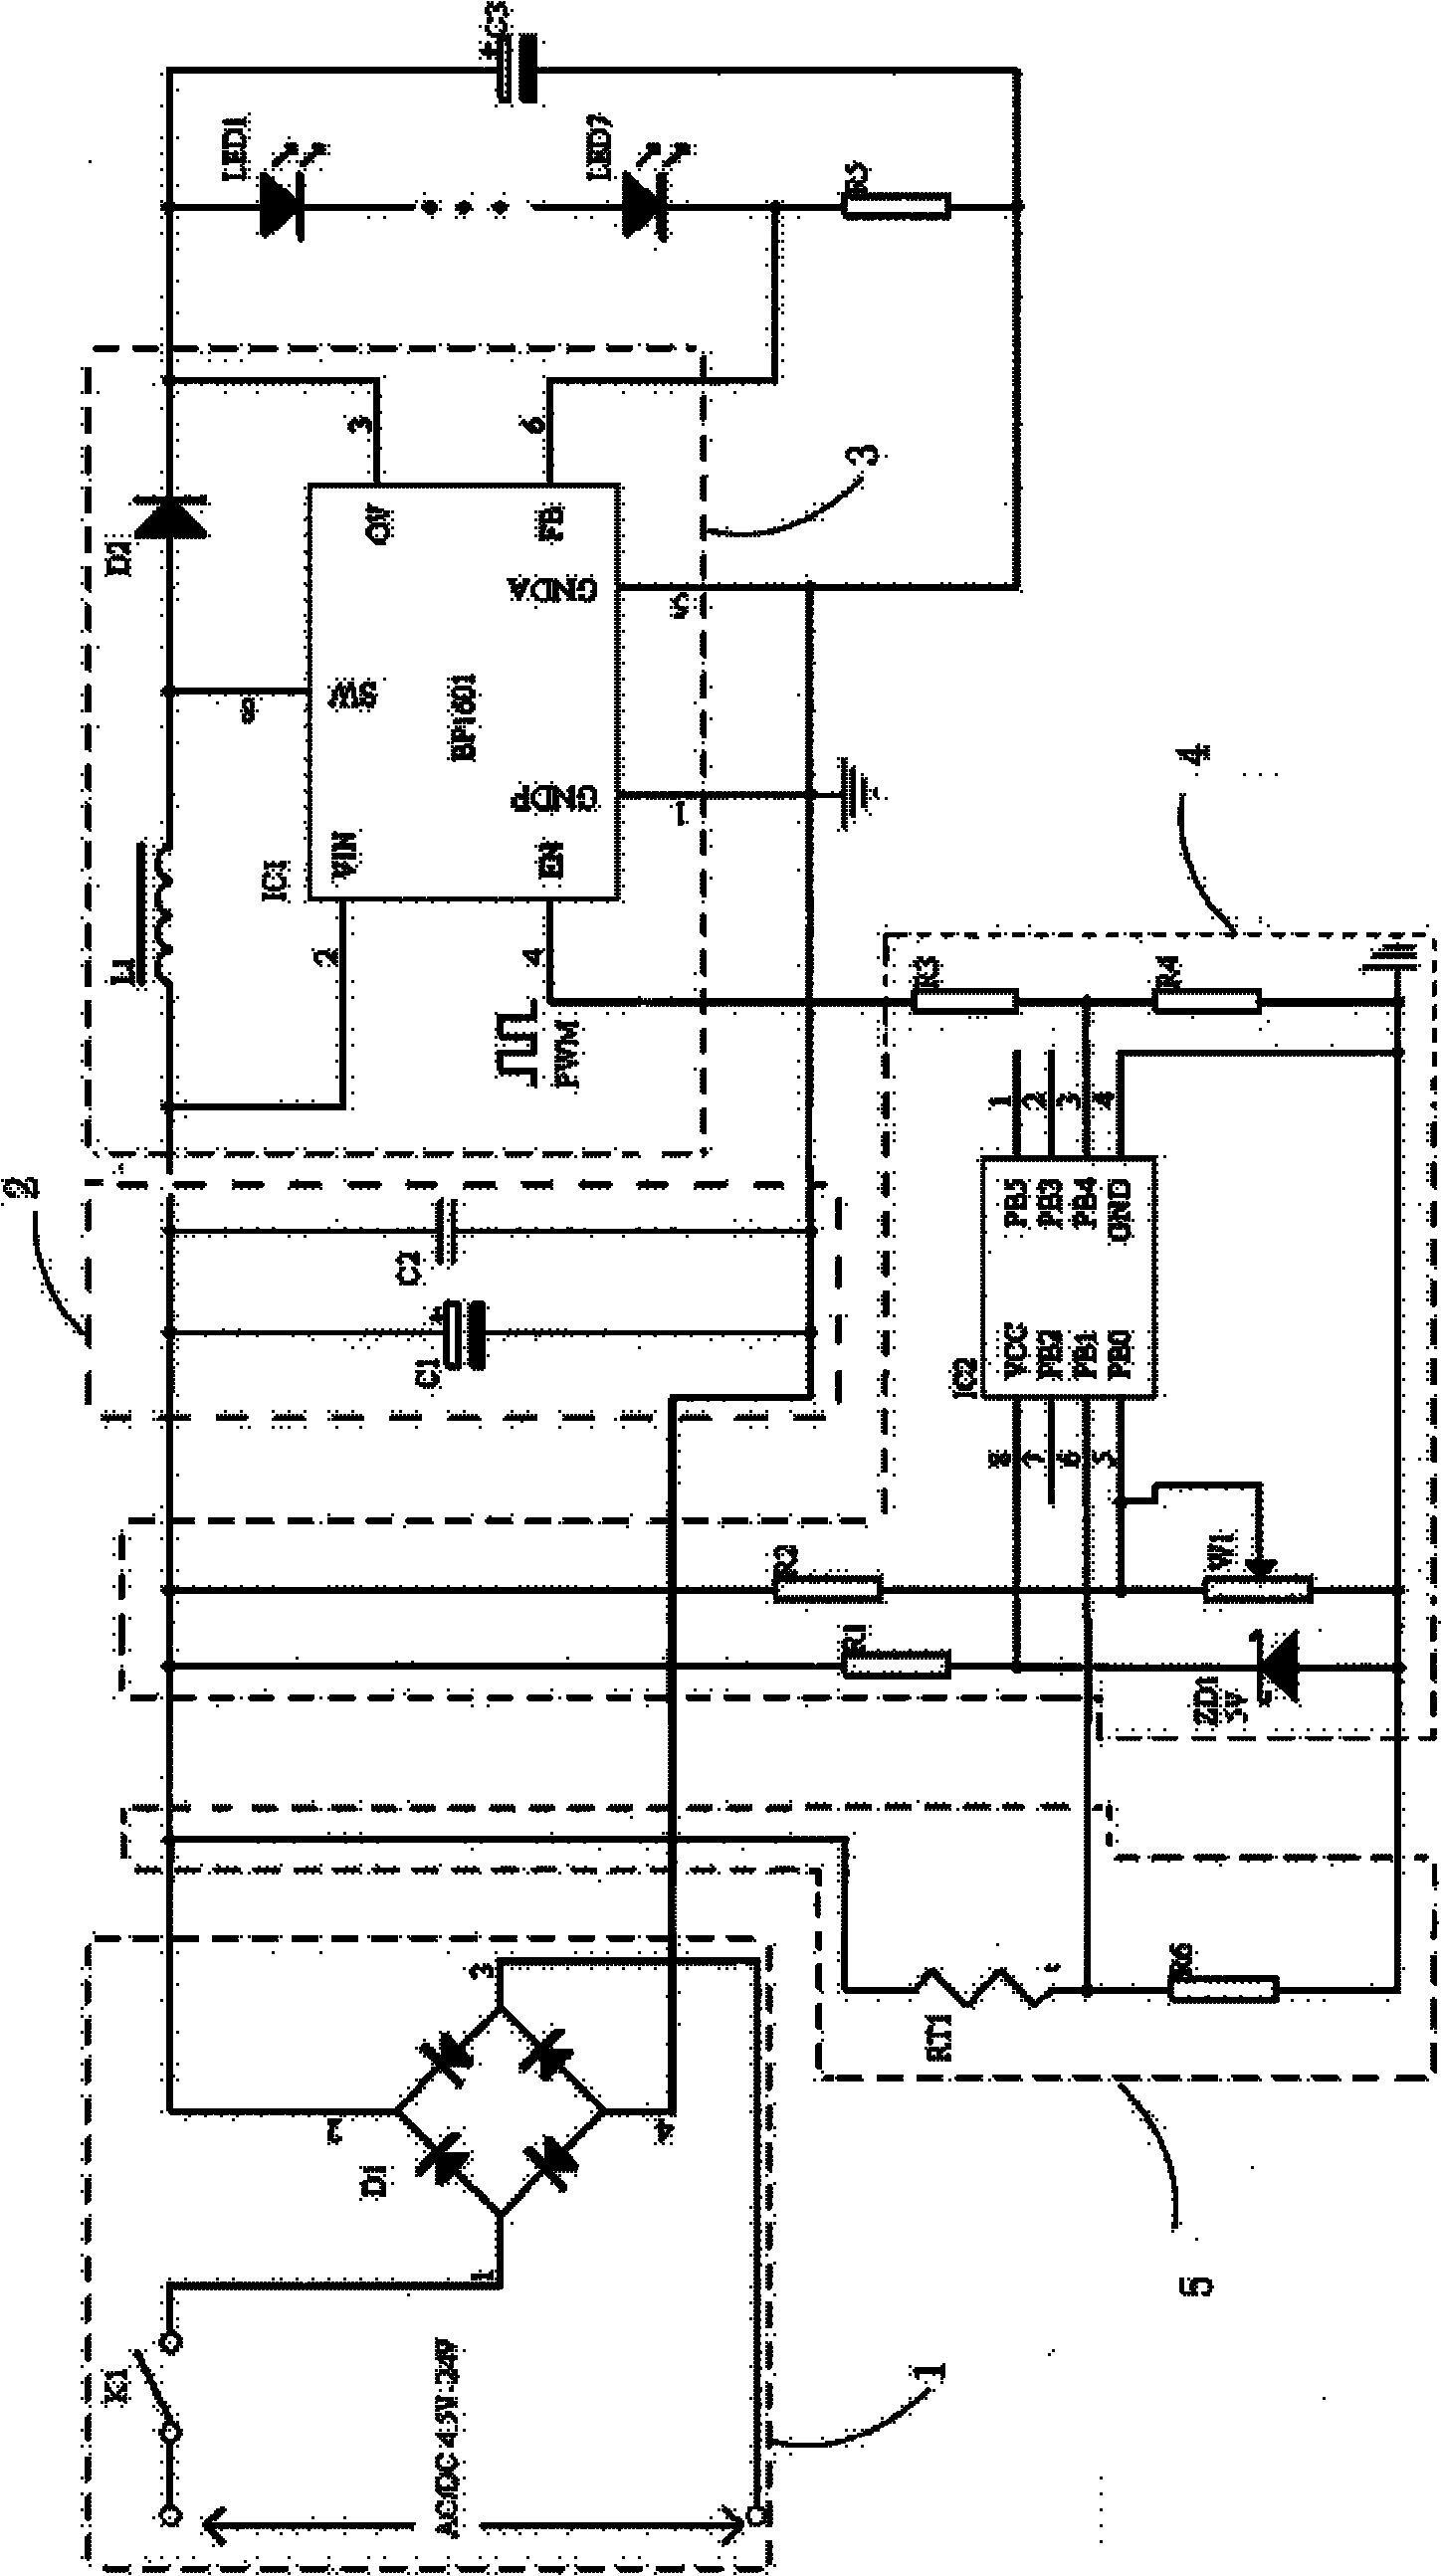 LED (Light Emitting Diode) constant-current dimming drive circuit device